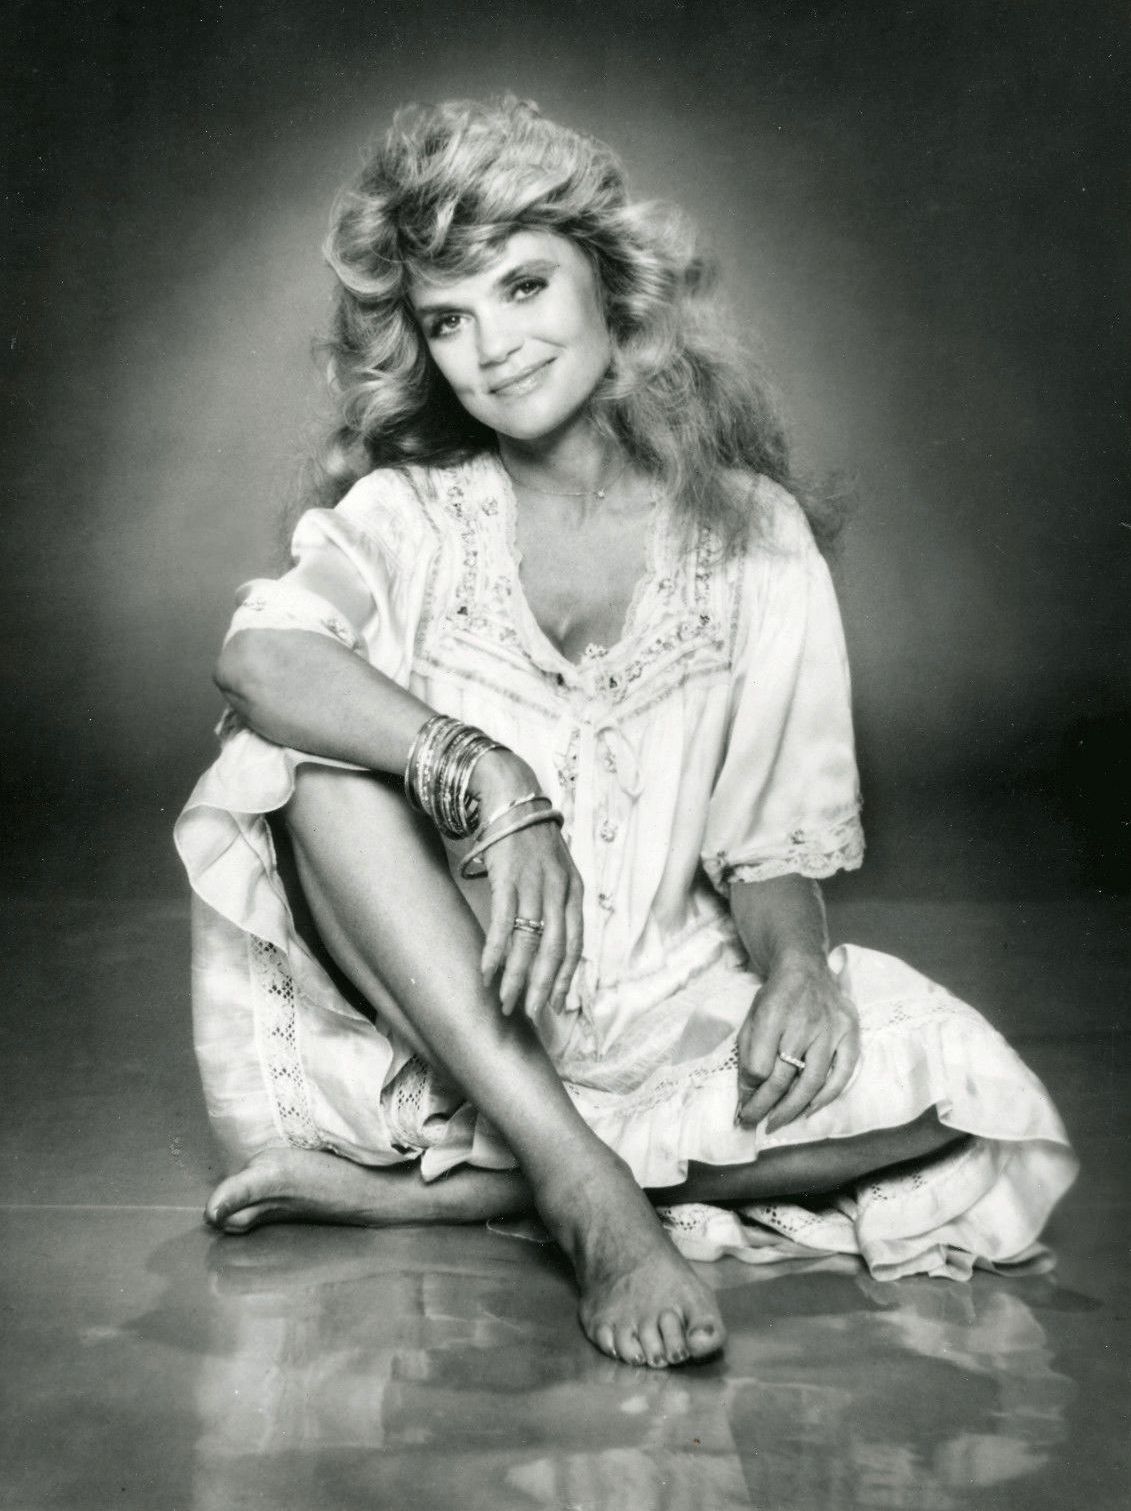 Batter reccomend Dyan cannon in pantyhose